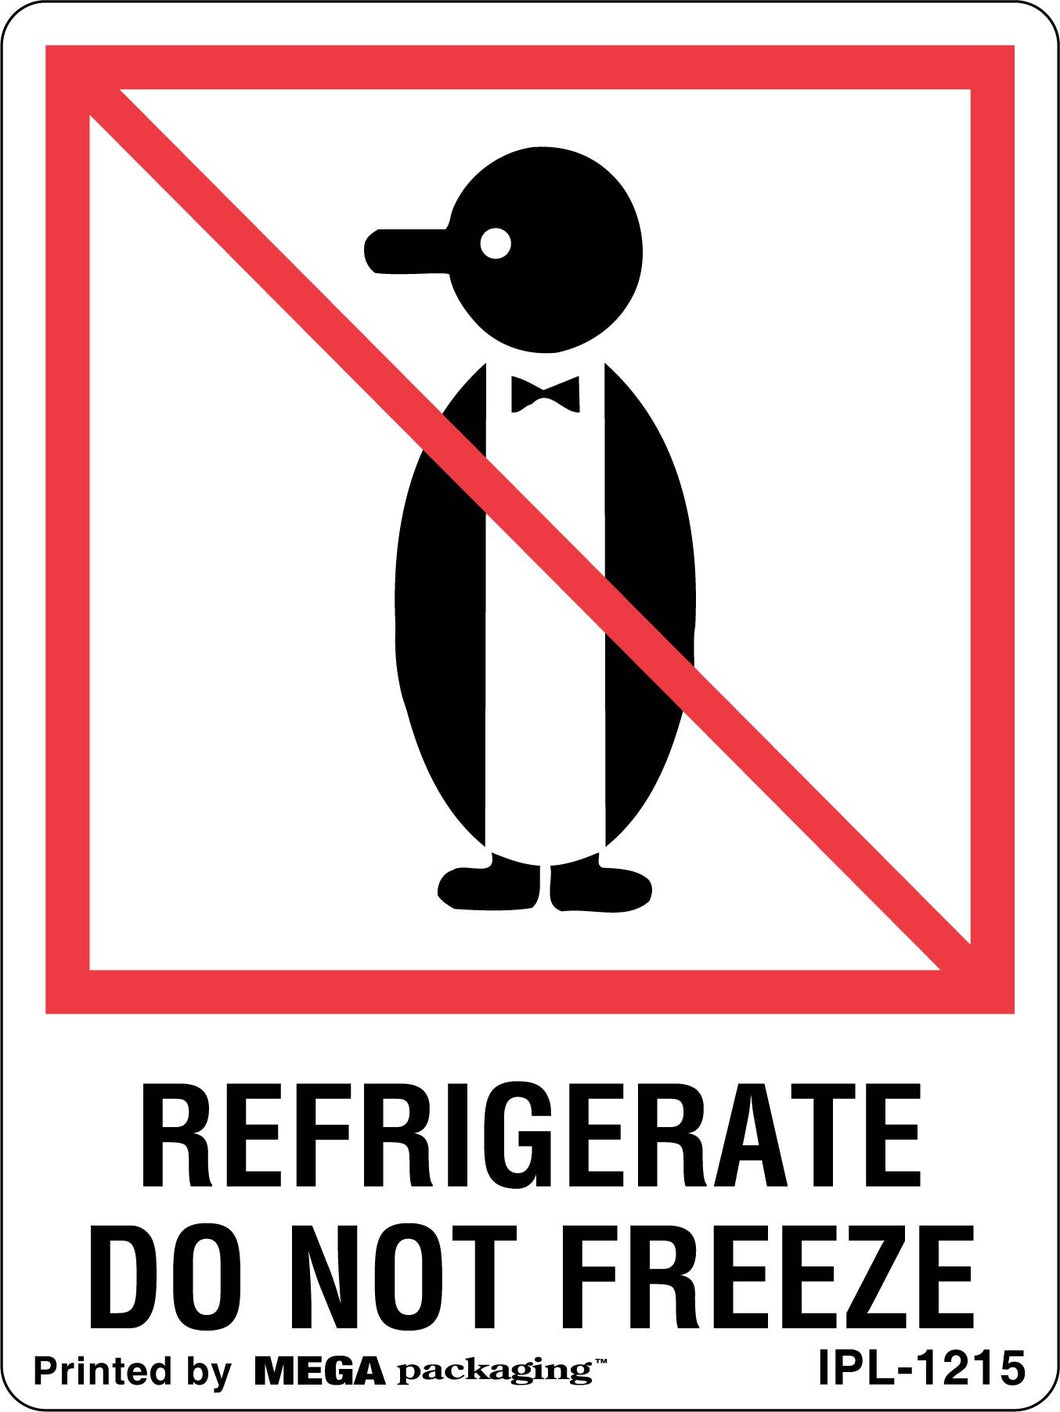 IPL-1215 3 x 4 Refrigerate Do Not Freeze Penguin Label 500/Roll